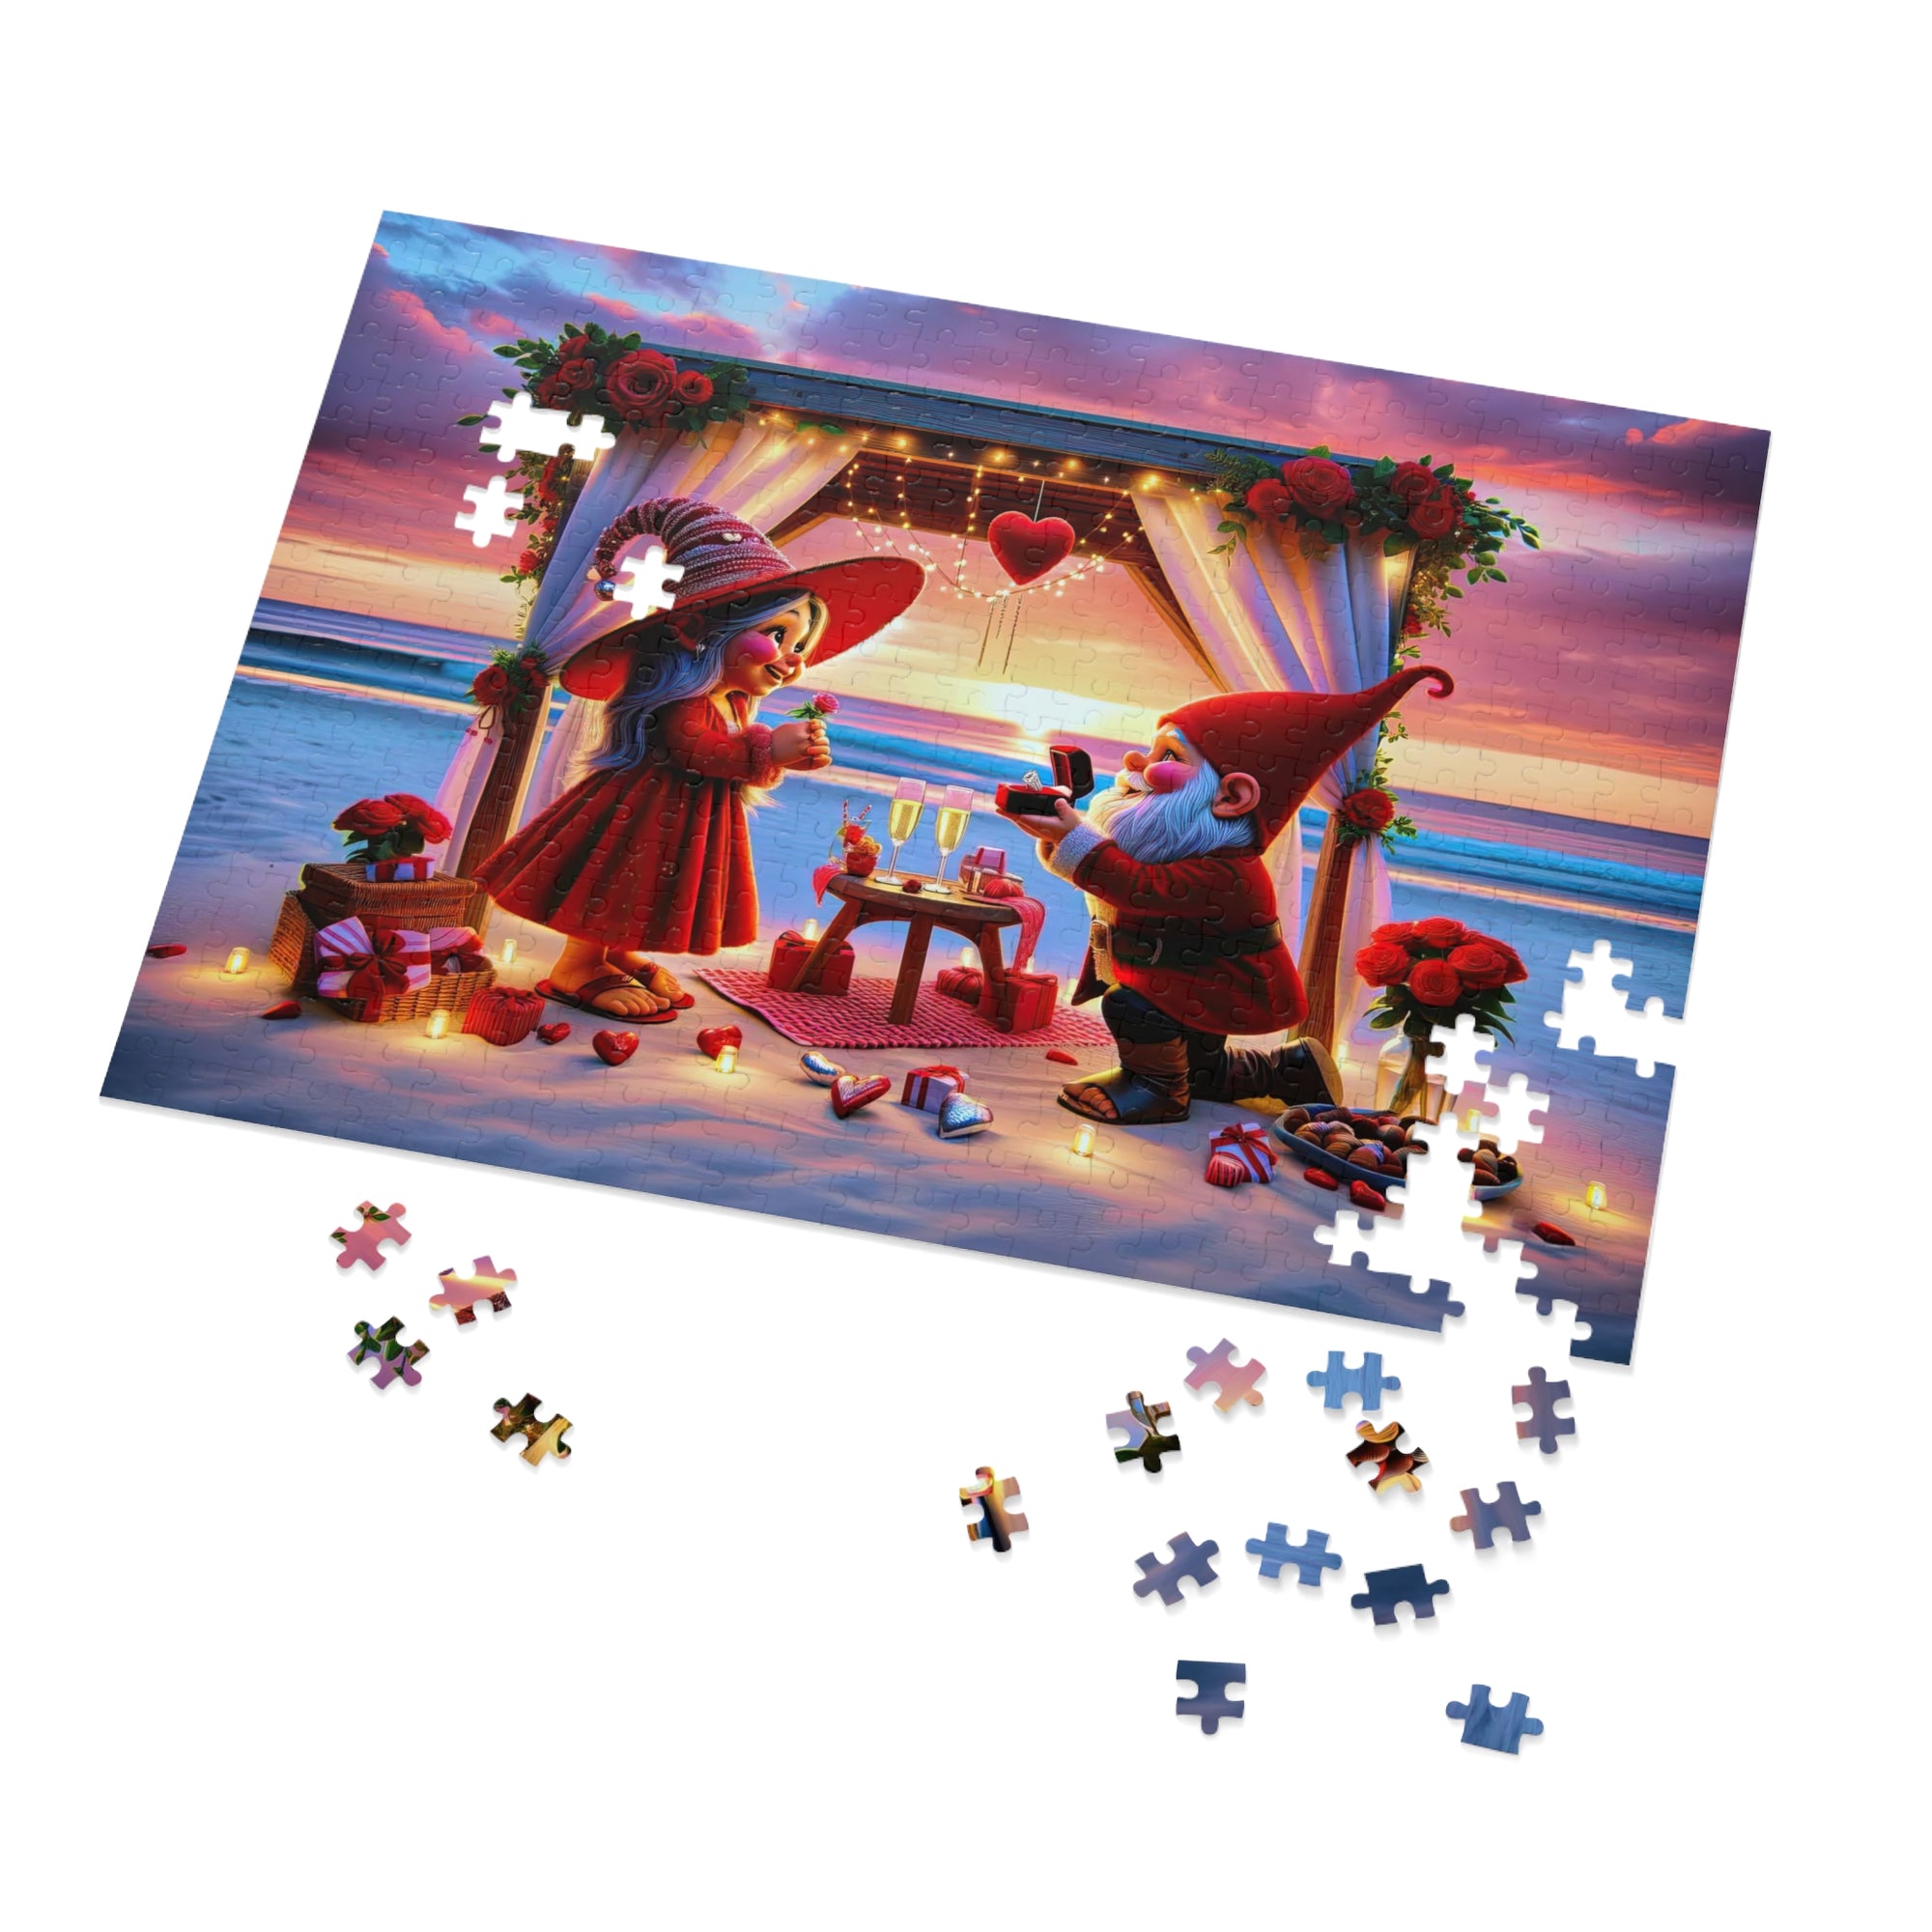 A Whimsical Beachside Engagement Jigsaw Puzzle